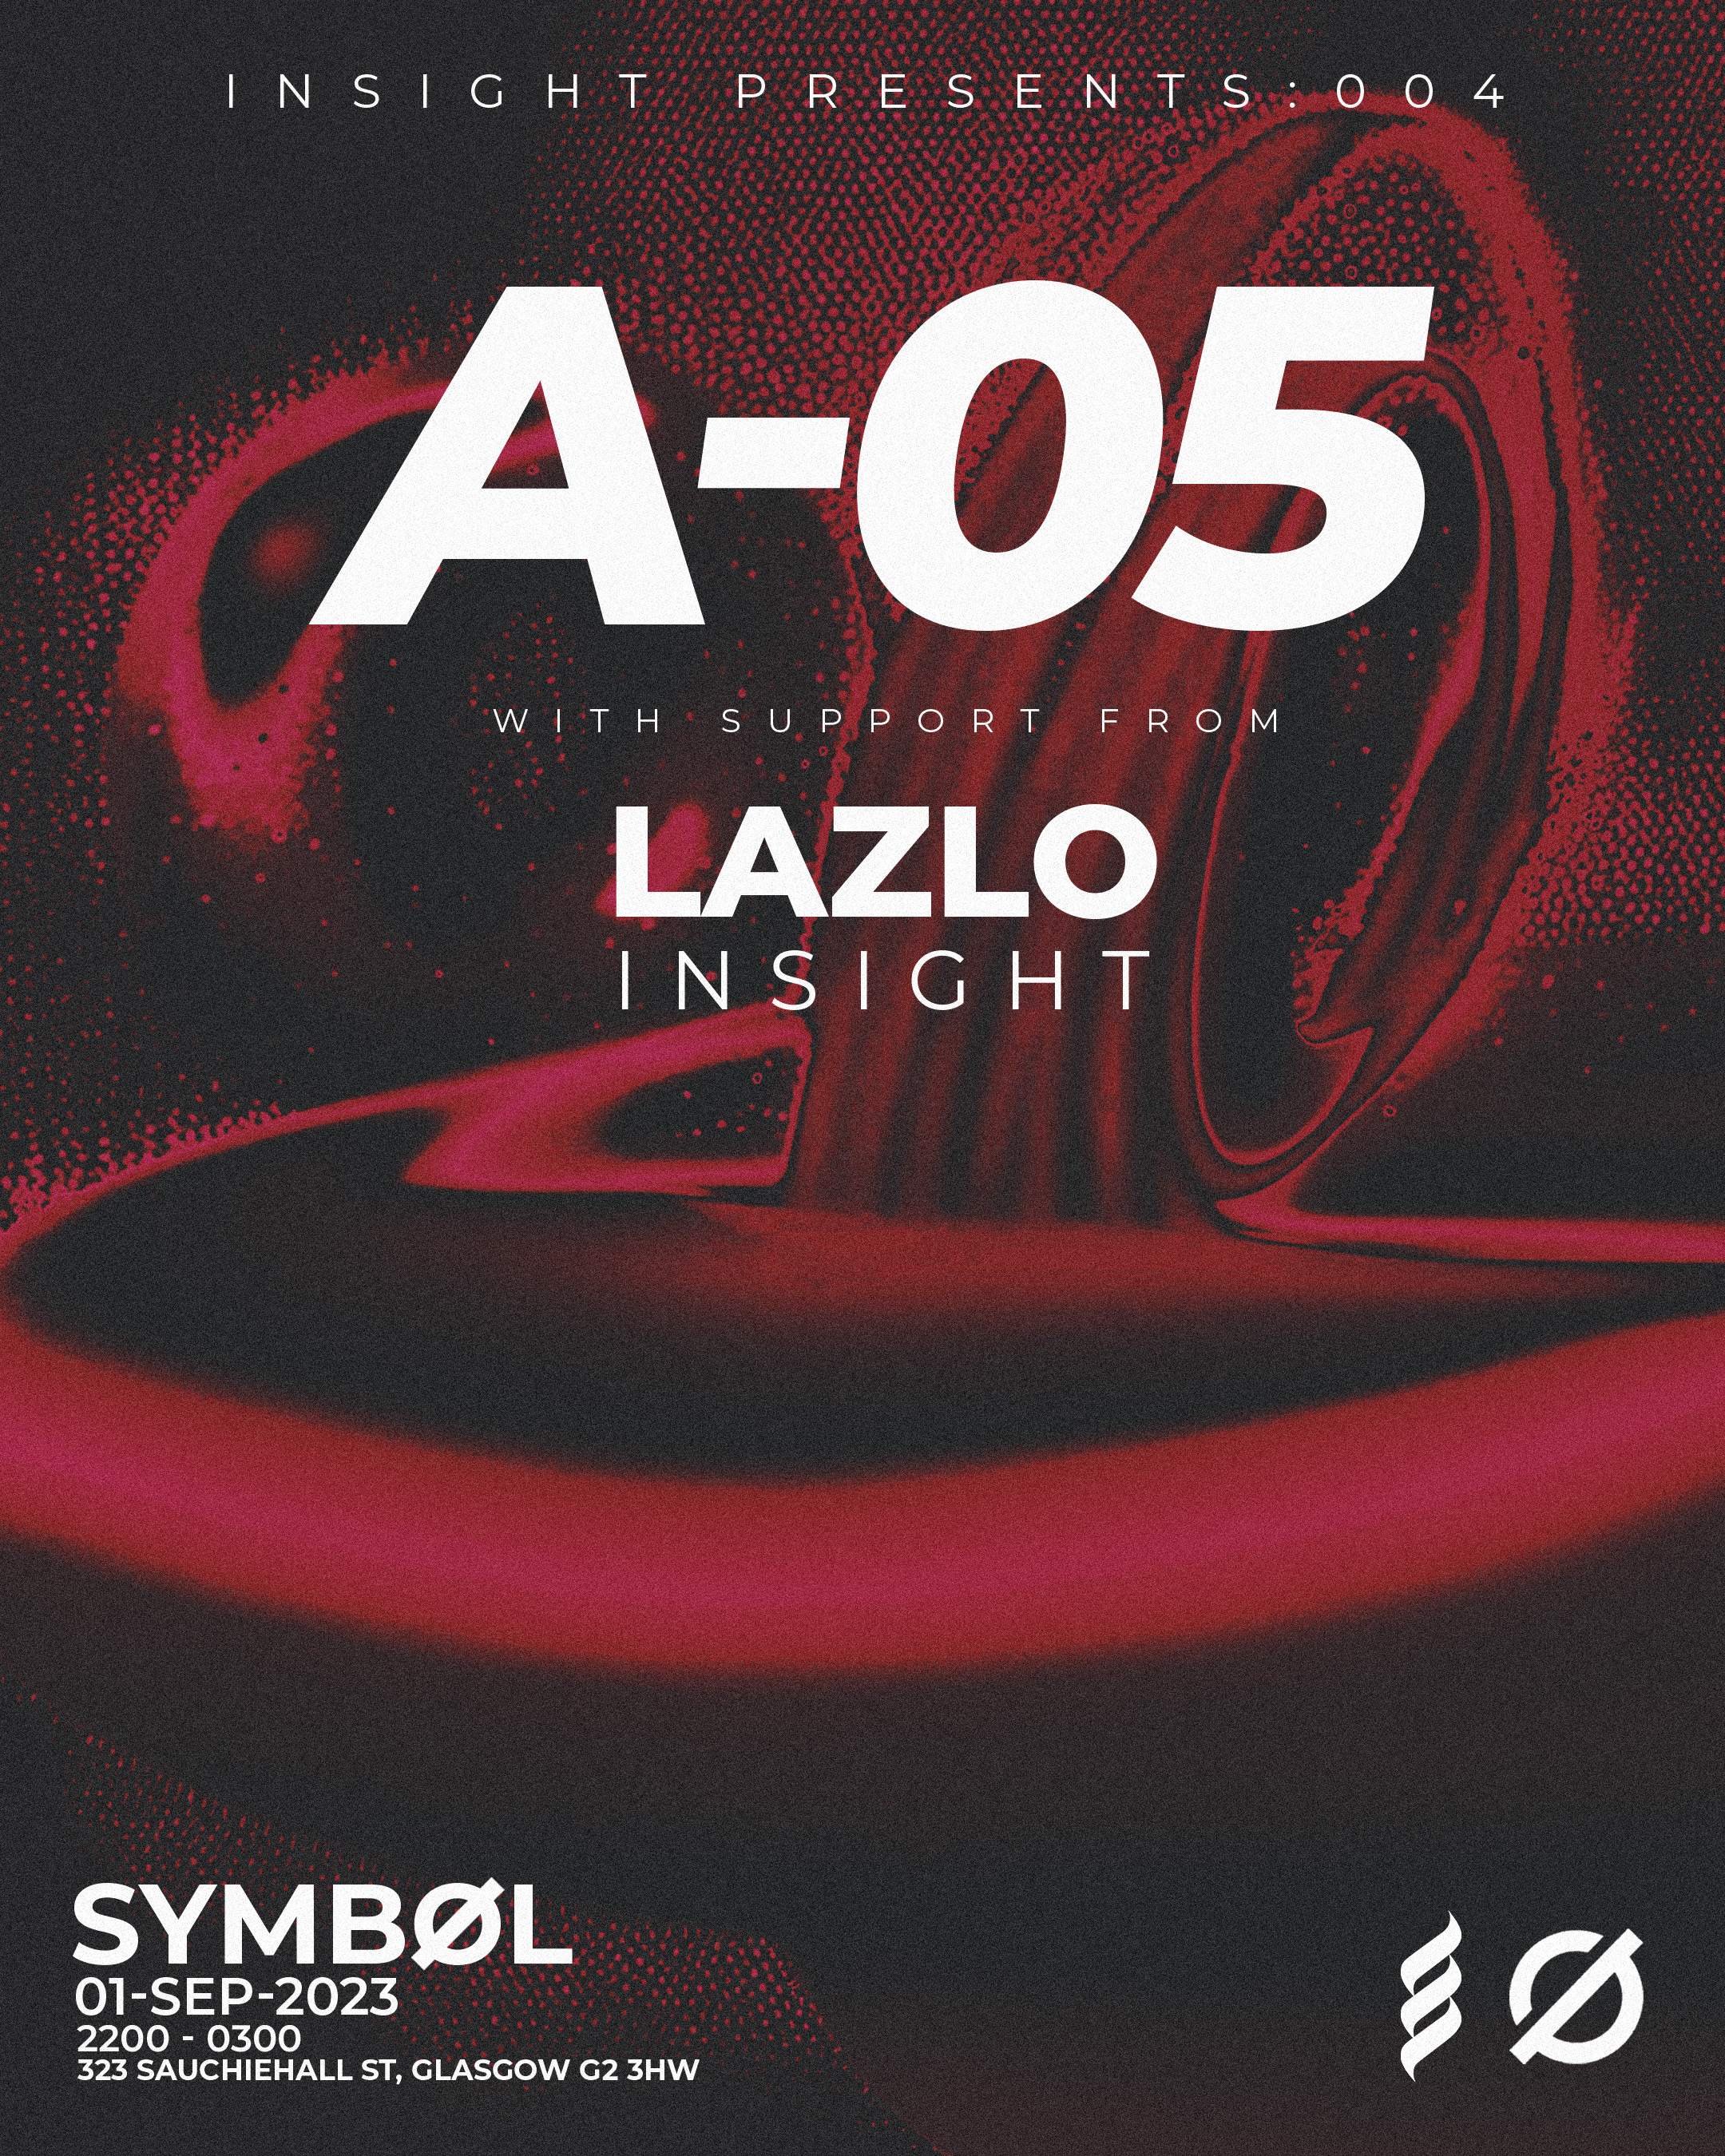 Insight 004 - A-05, Lazlo, Insight [CANCELLED] - フライヤー表